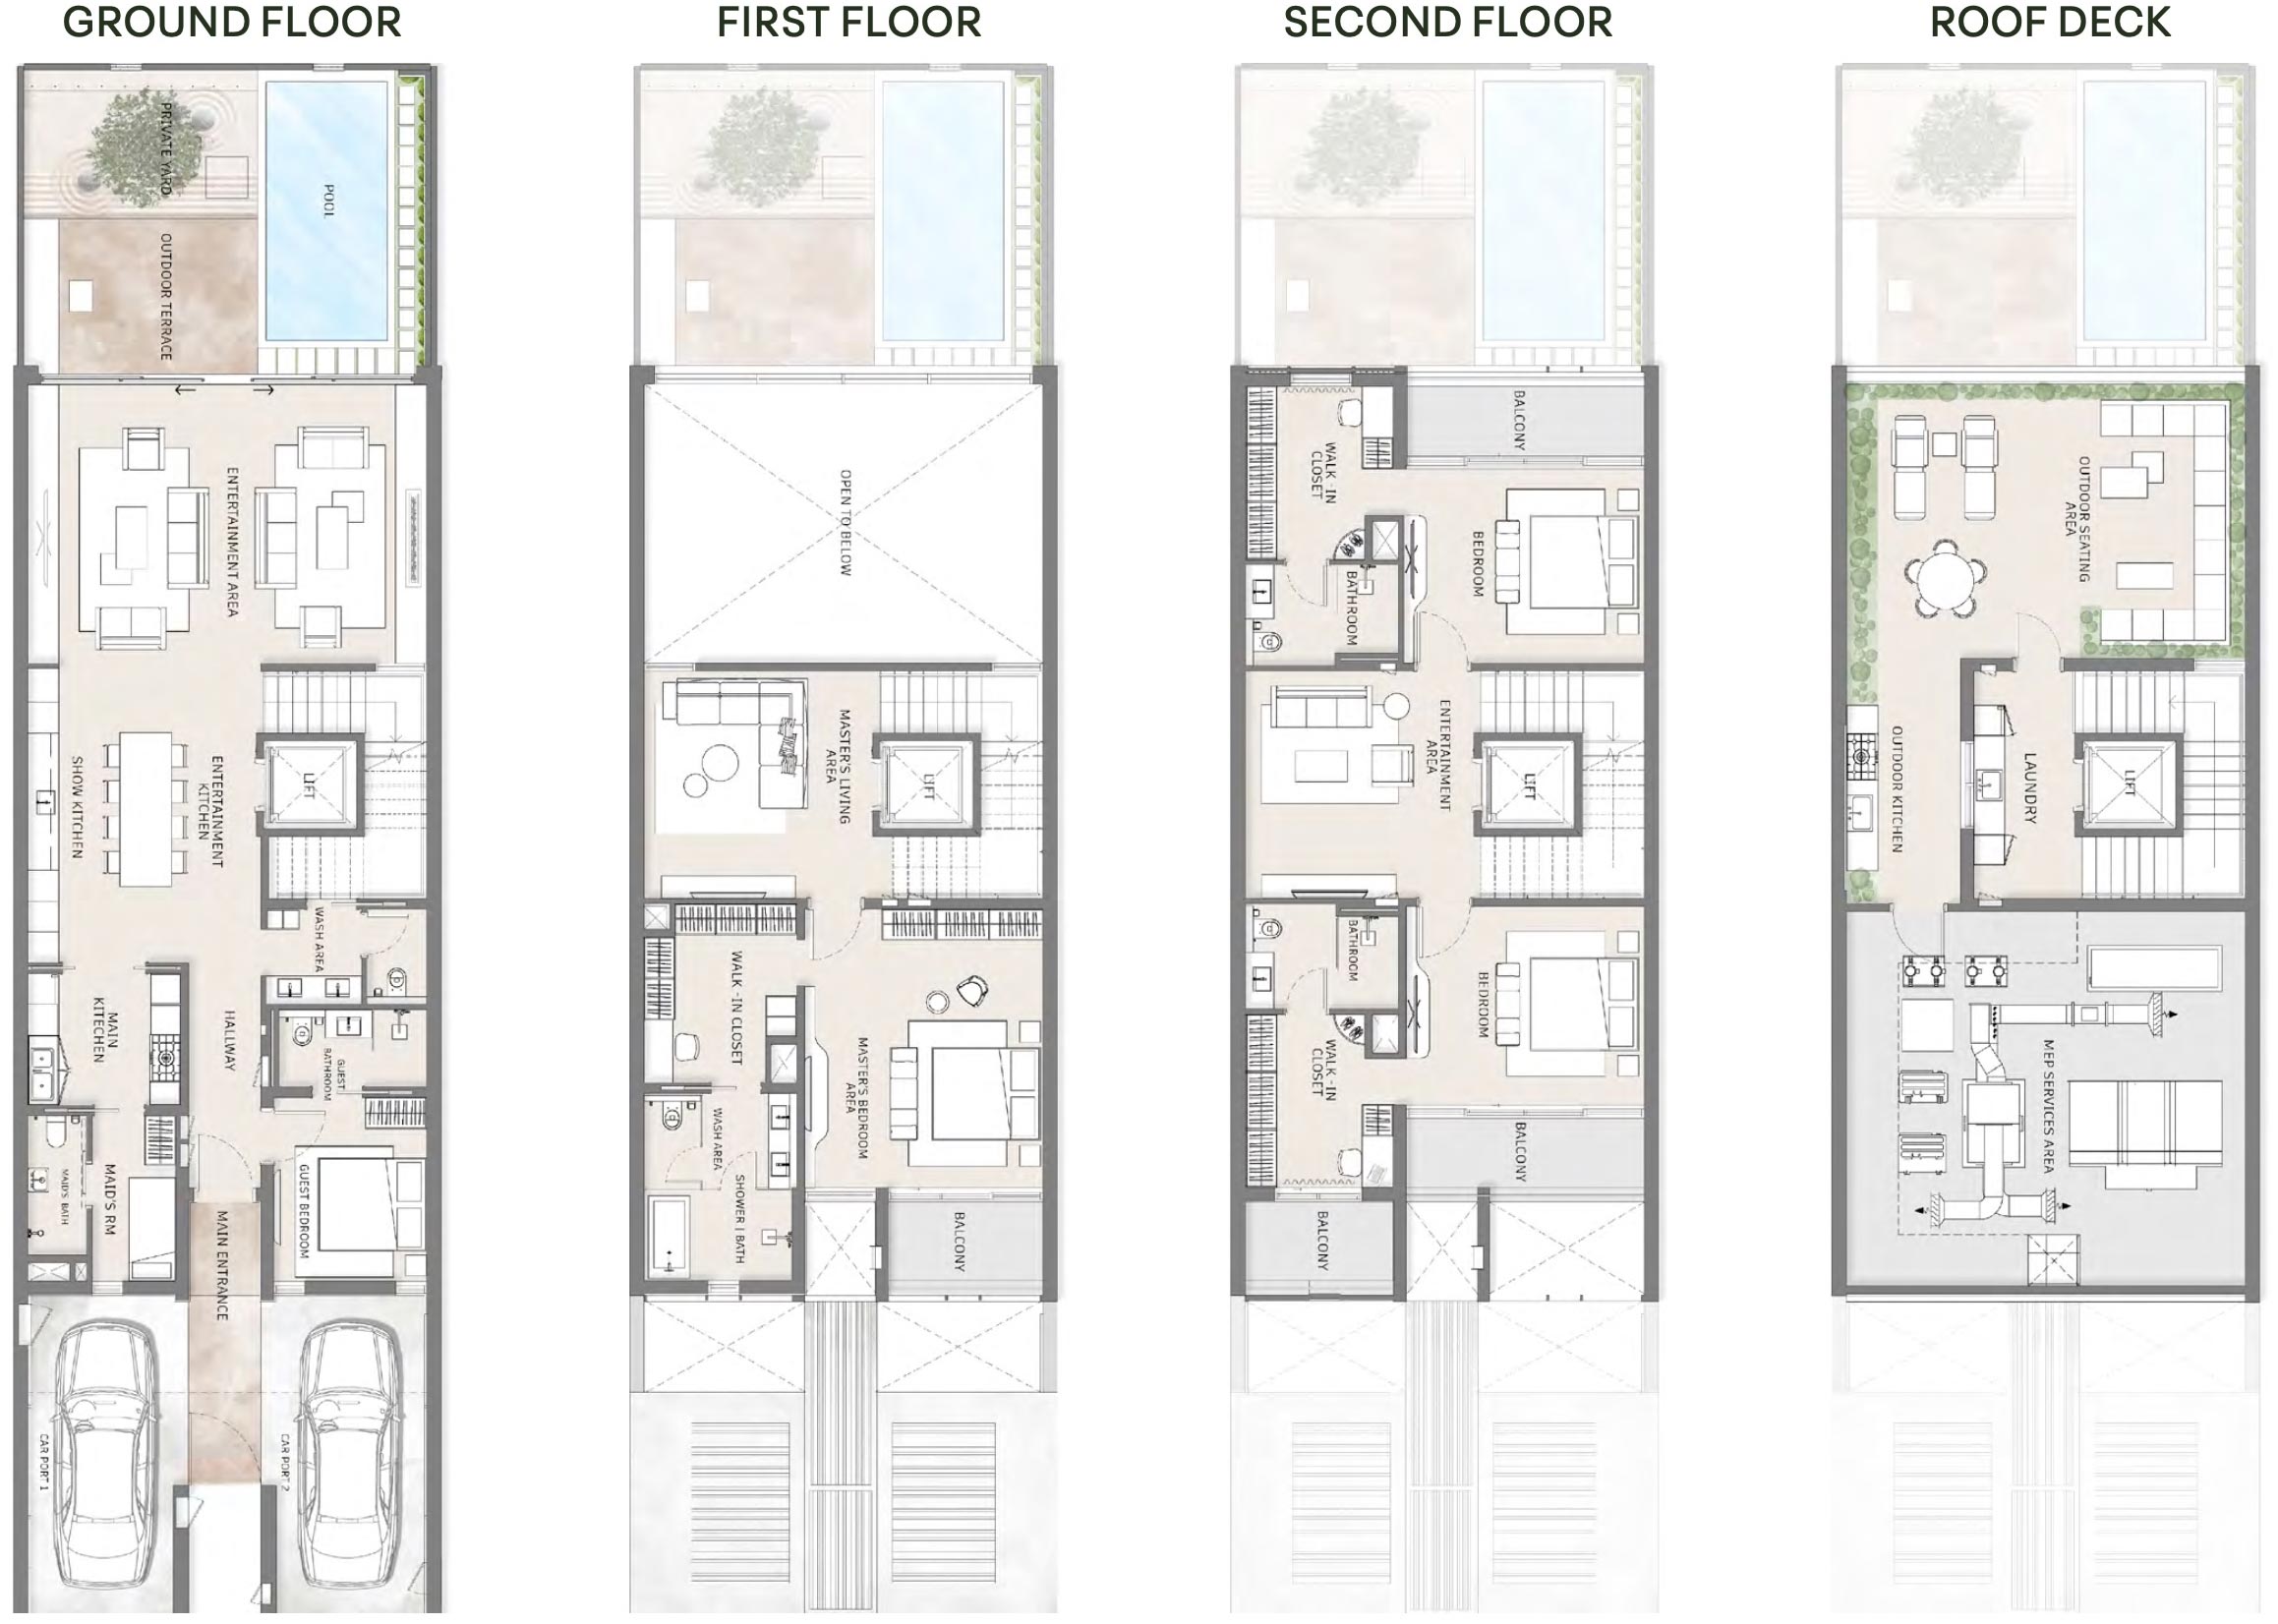 Floor Plans of MAG Central City Parks Townhouses